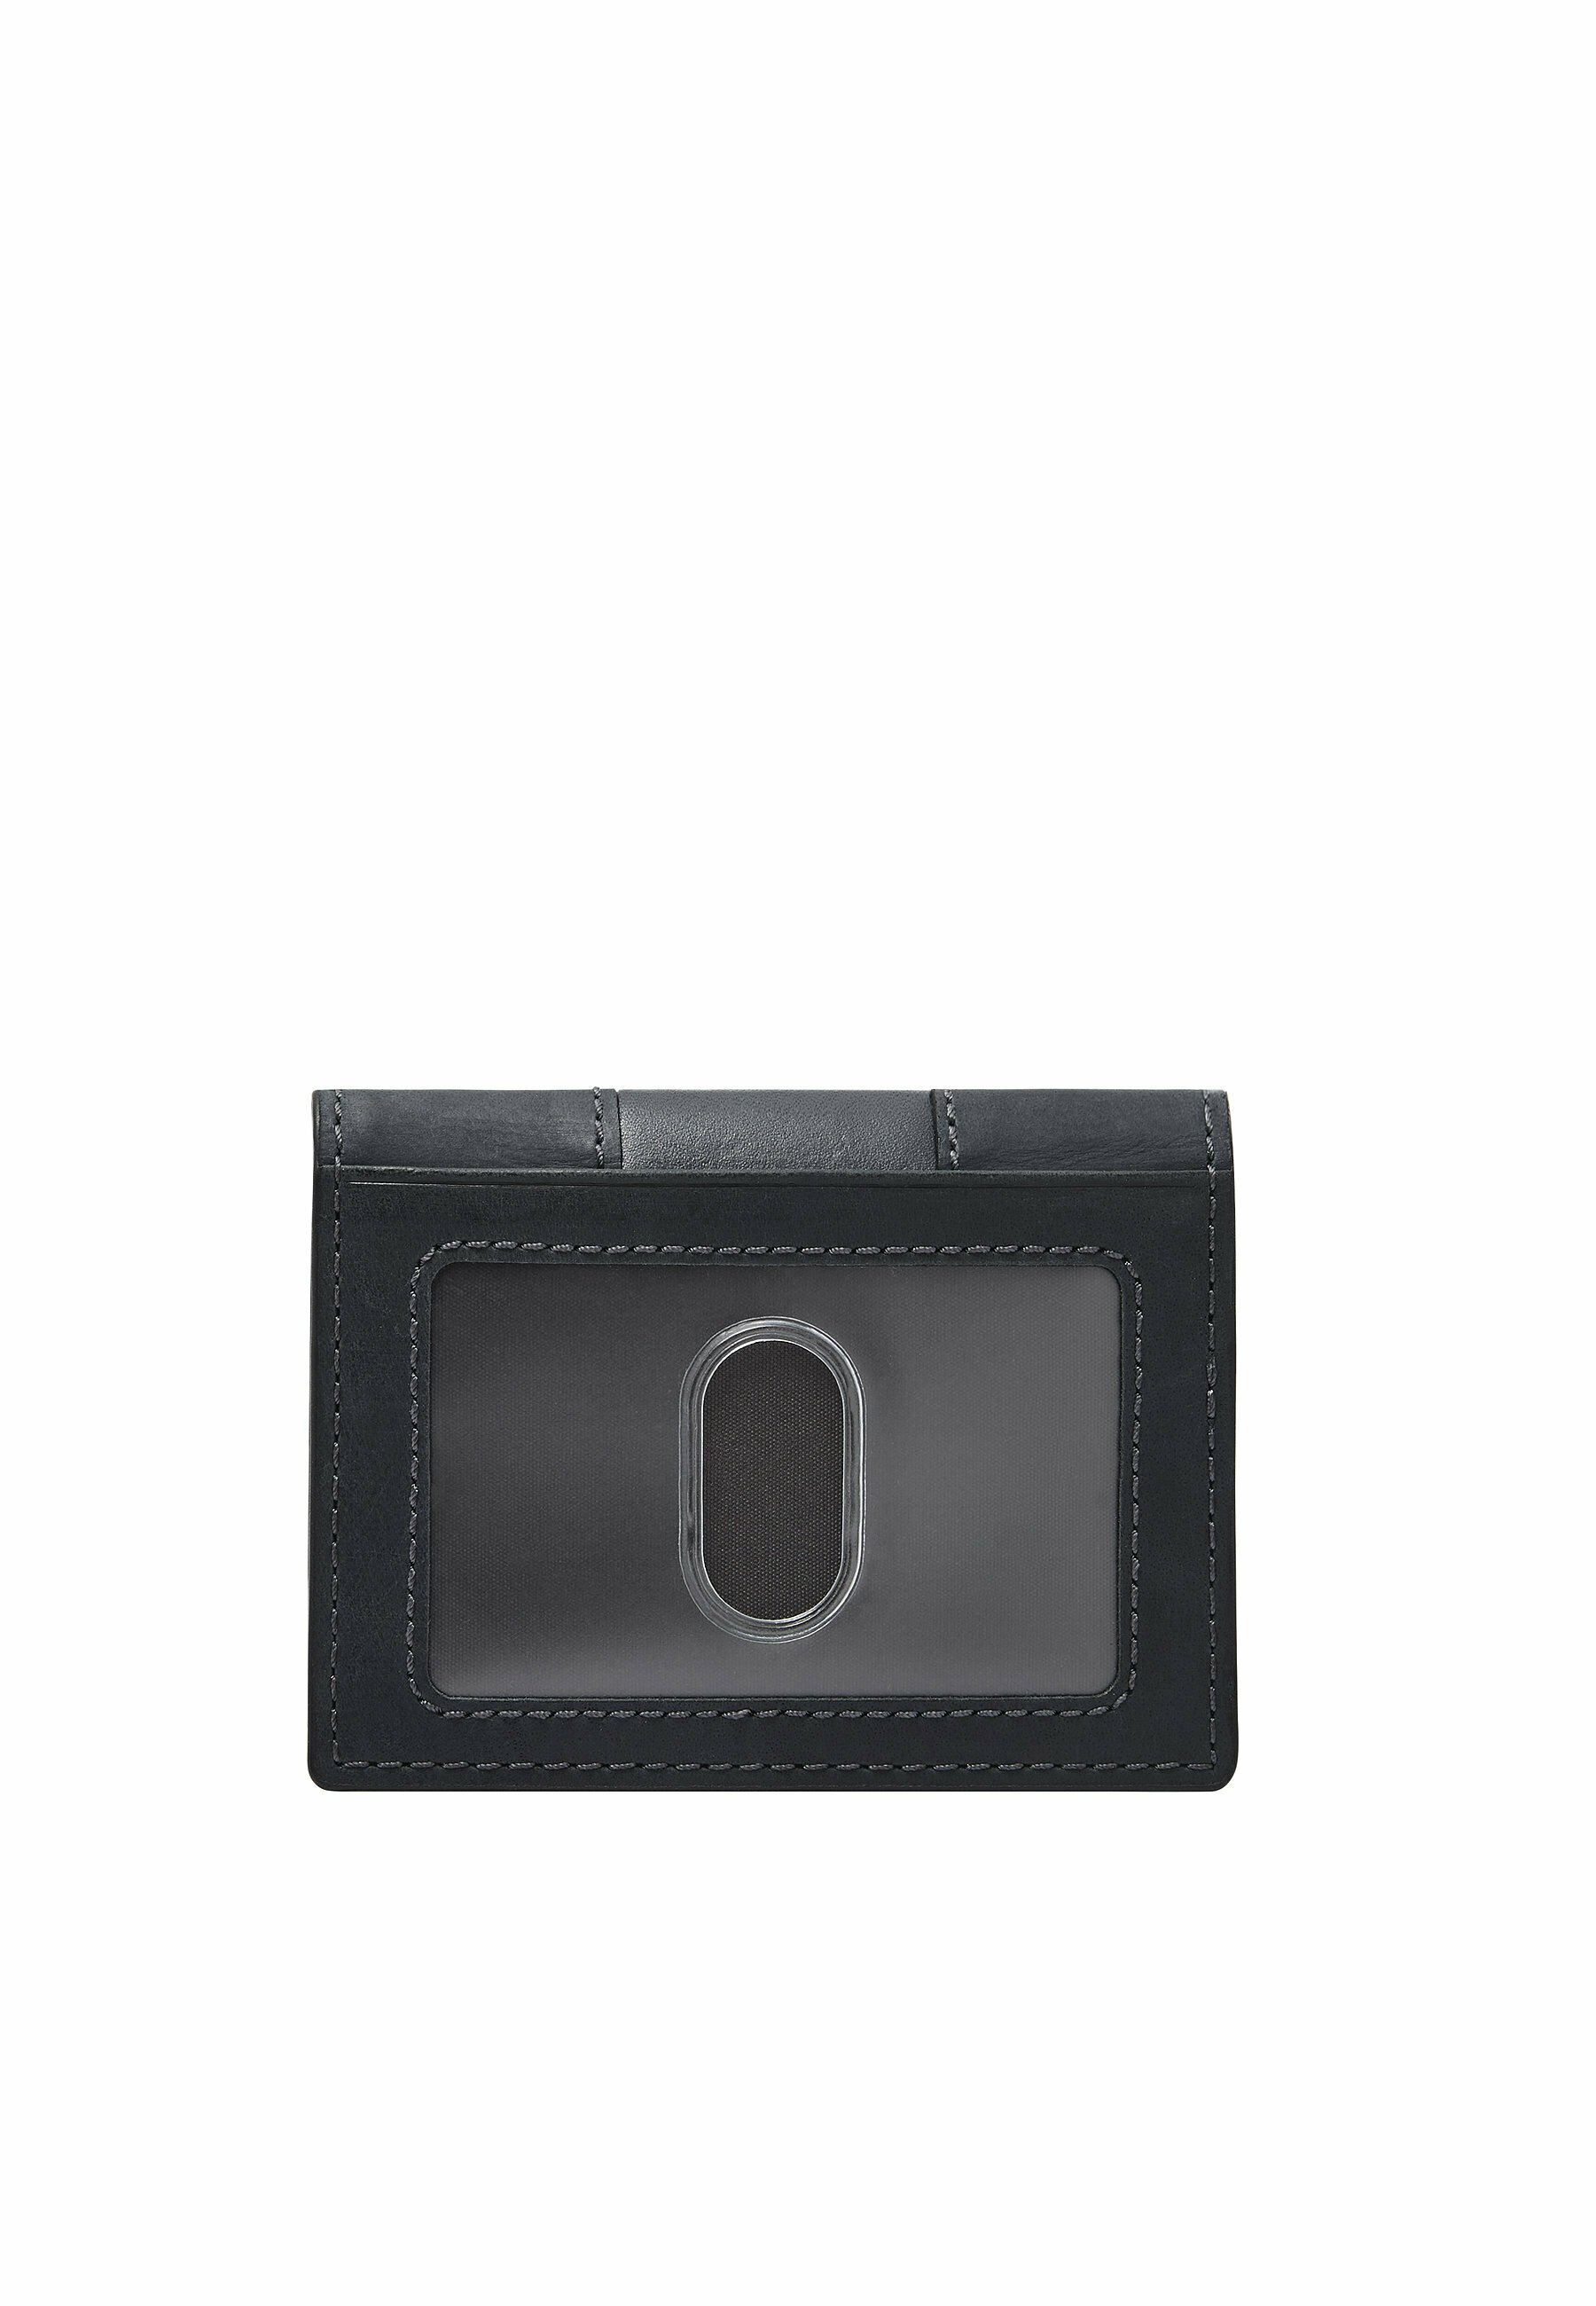 Buy Fossil Fossil Male's Westover blue Leather Card Case ML Online | ZALORA Singapore